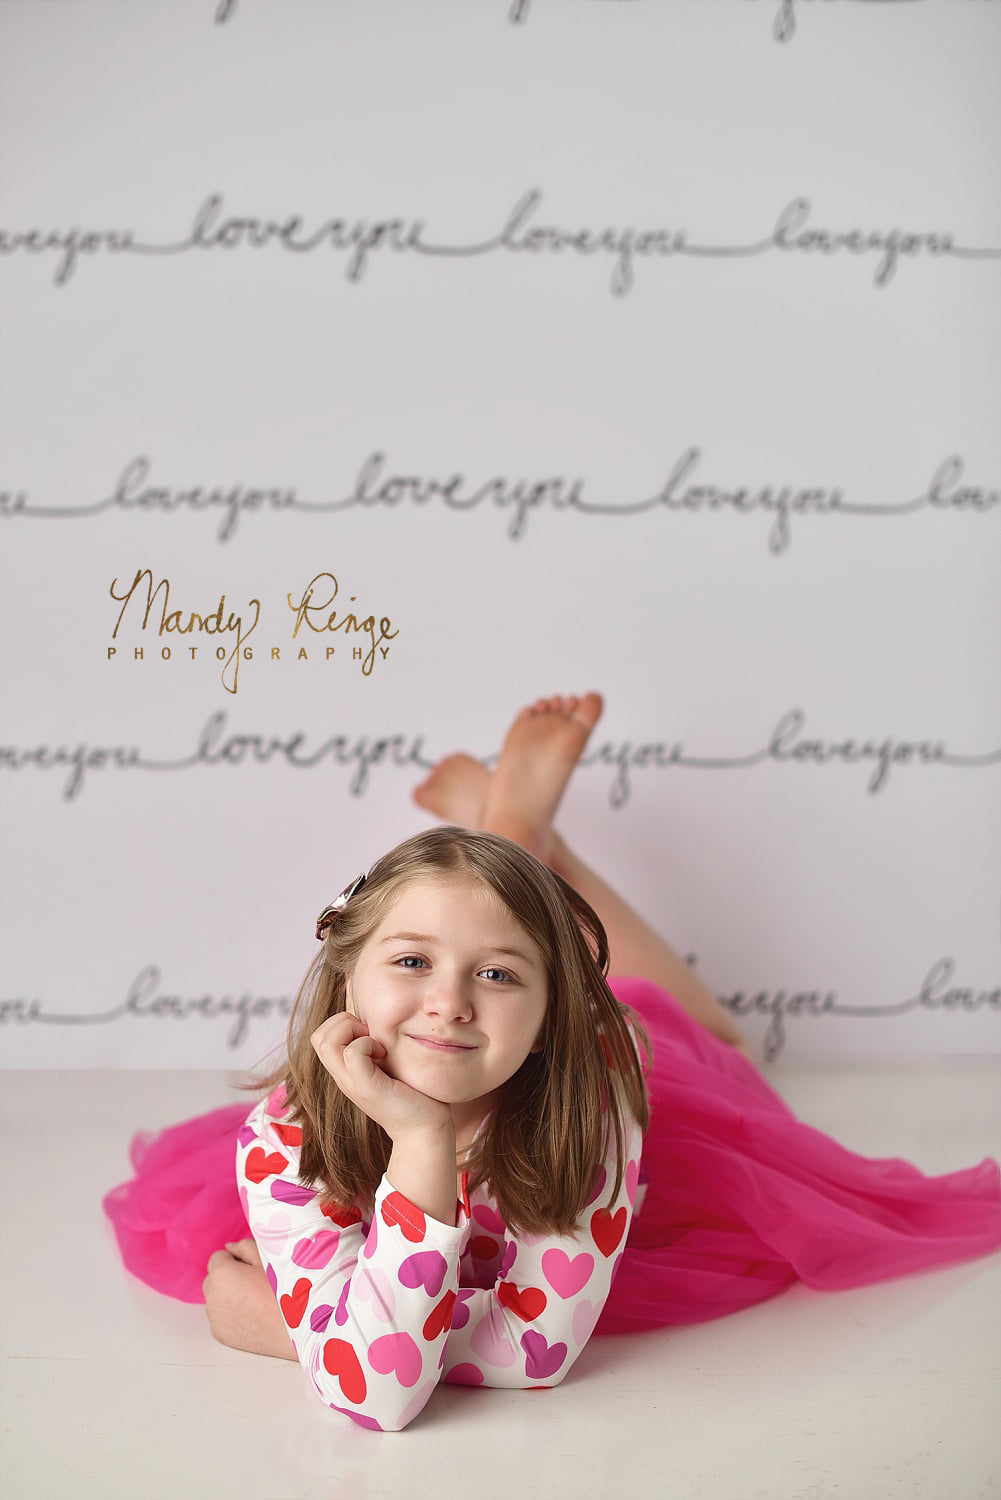 Kate Love You Script Backdrop Designed by Mandy Ringe Photography